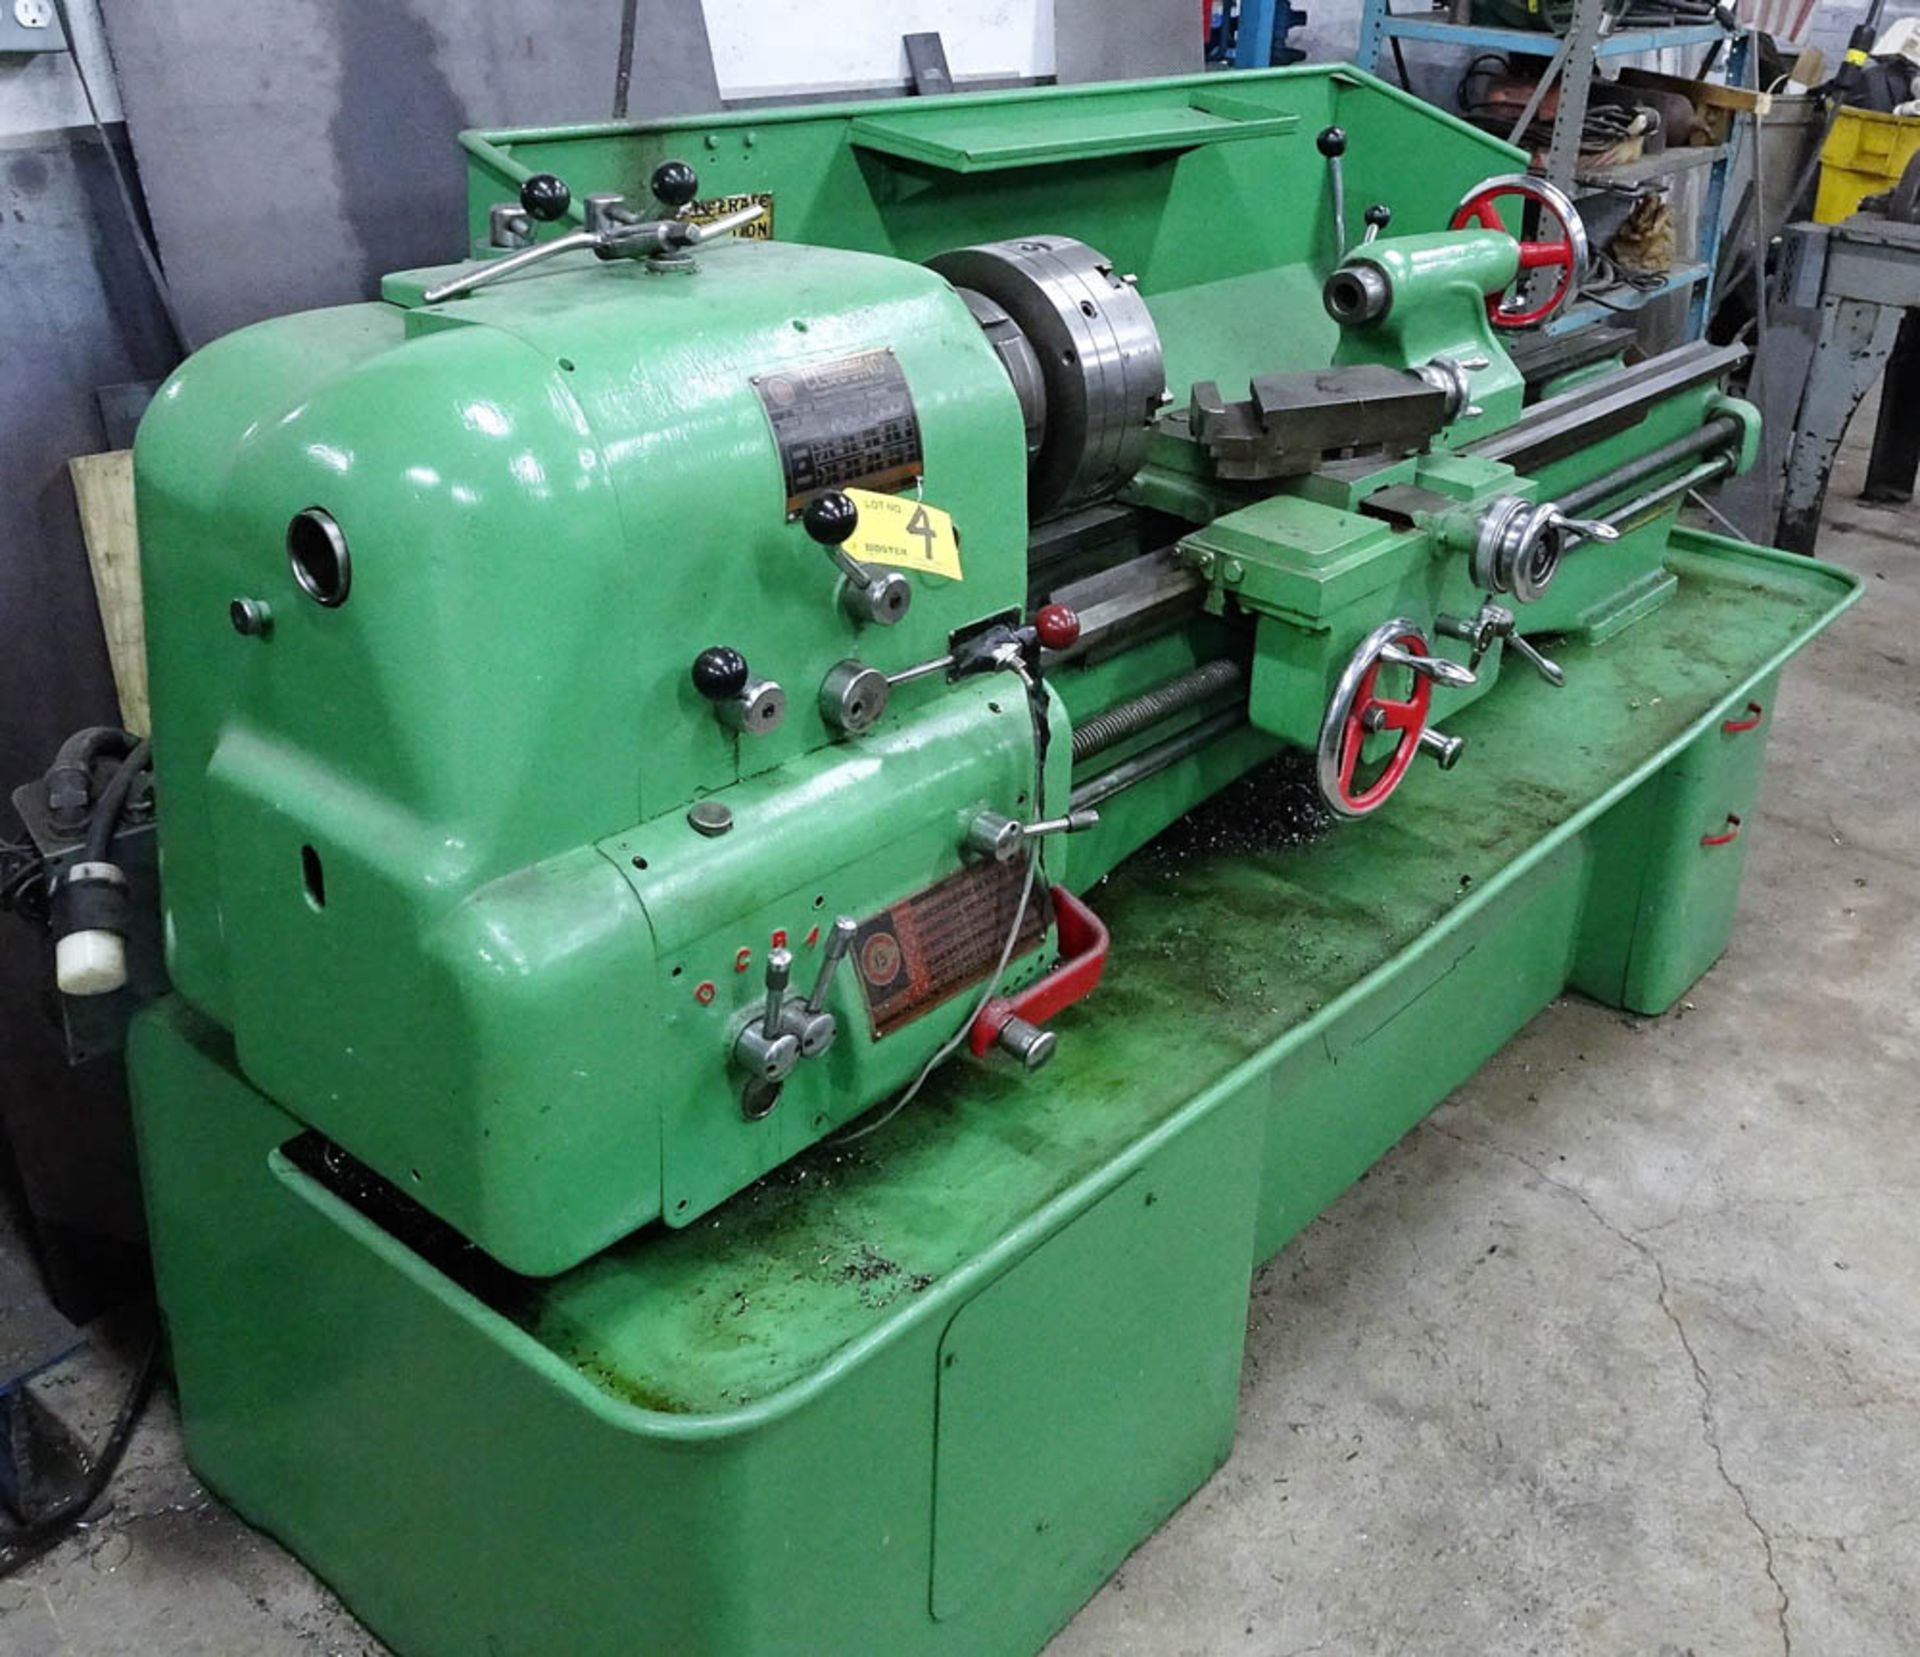 CLAUSING GEAR HEAD ENGINE LATHE WITH 60" TABLE, 10" 6-JAW CHUCK, 13" SWING - Image 2 of 4